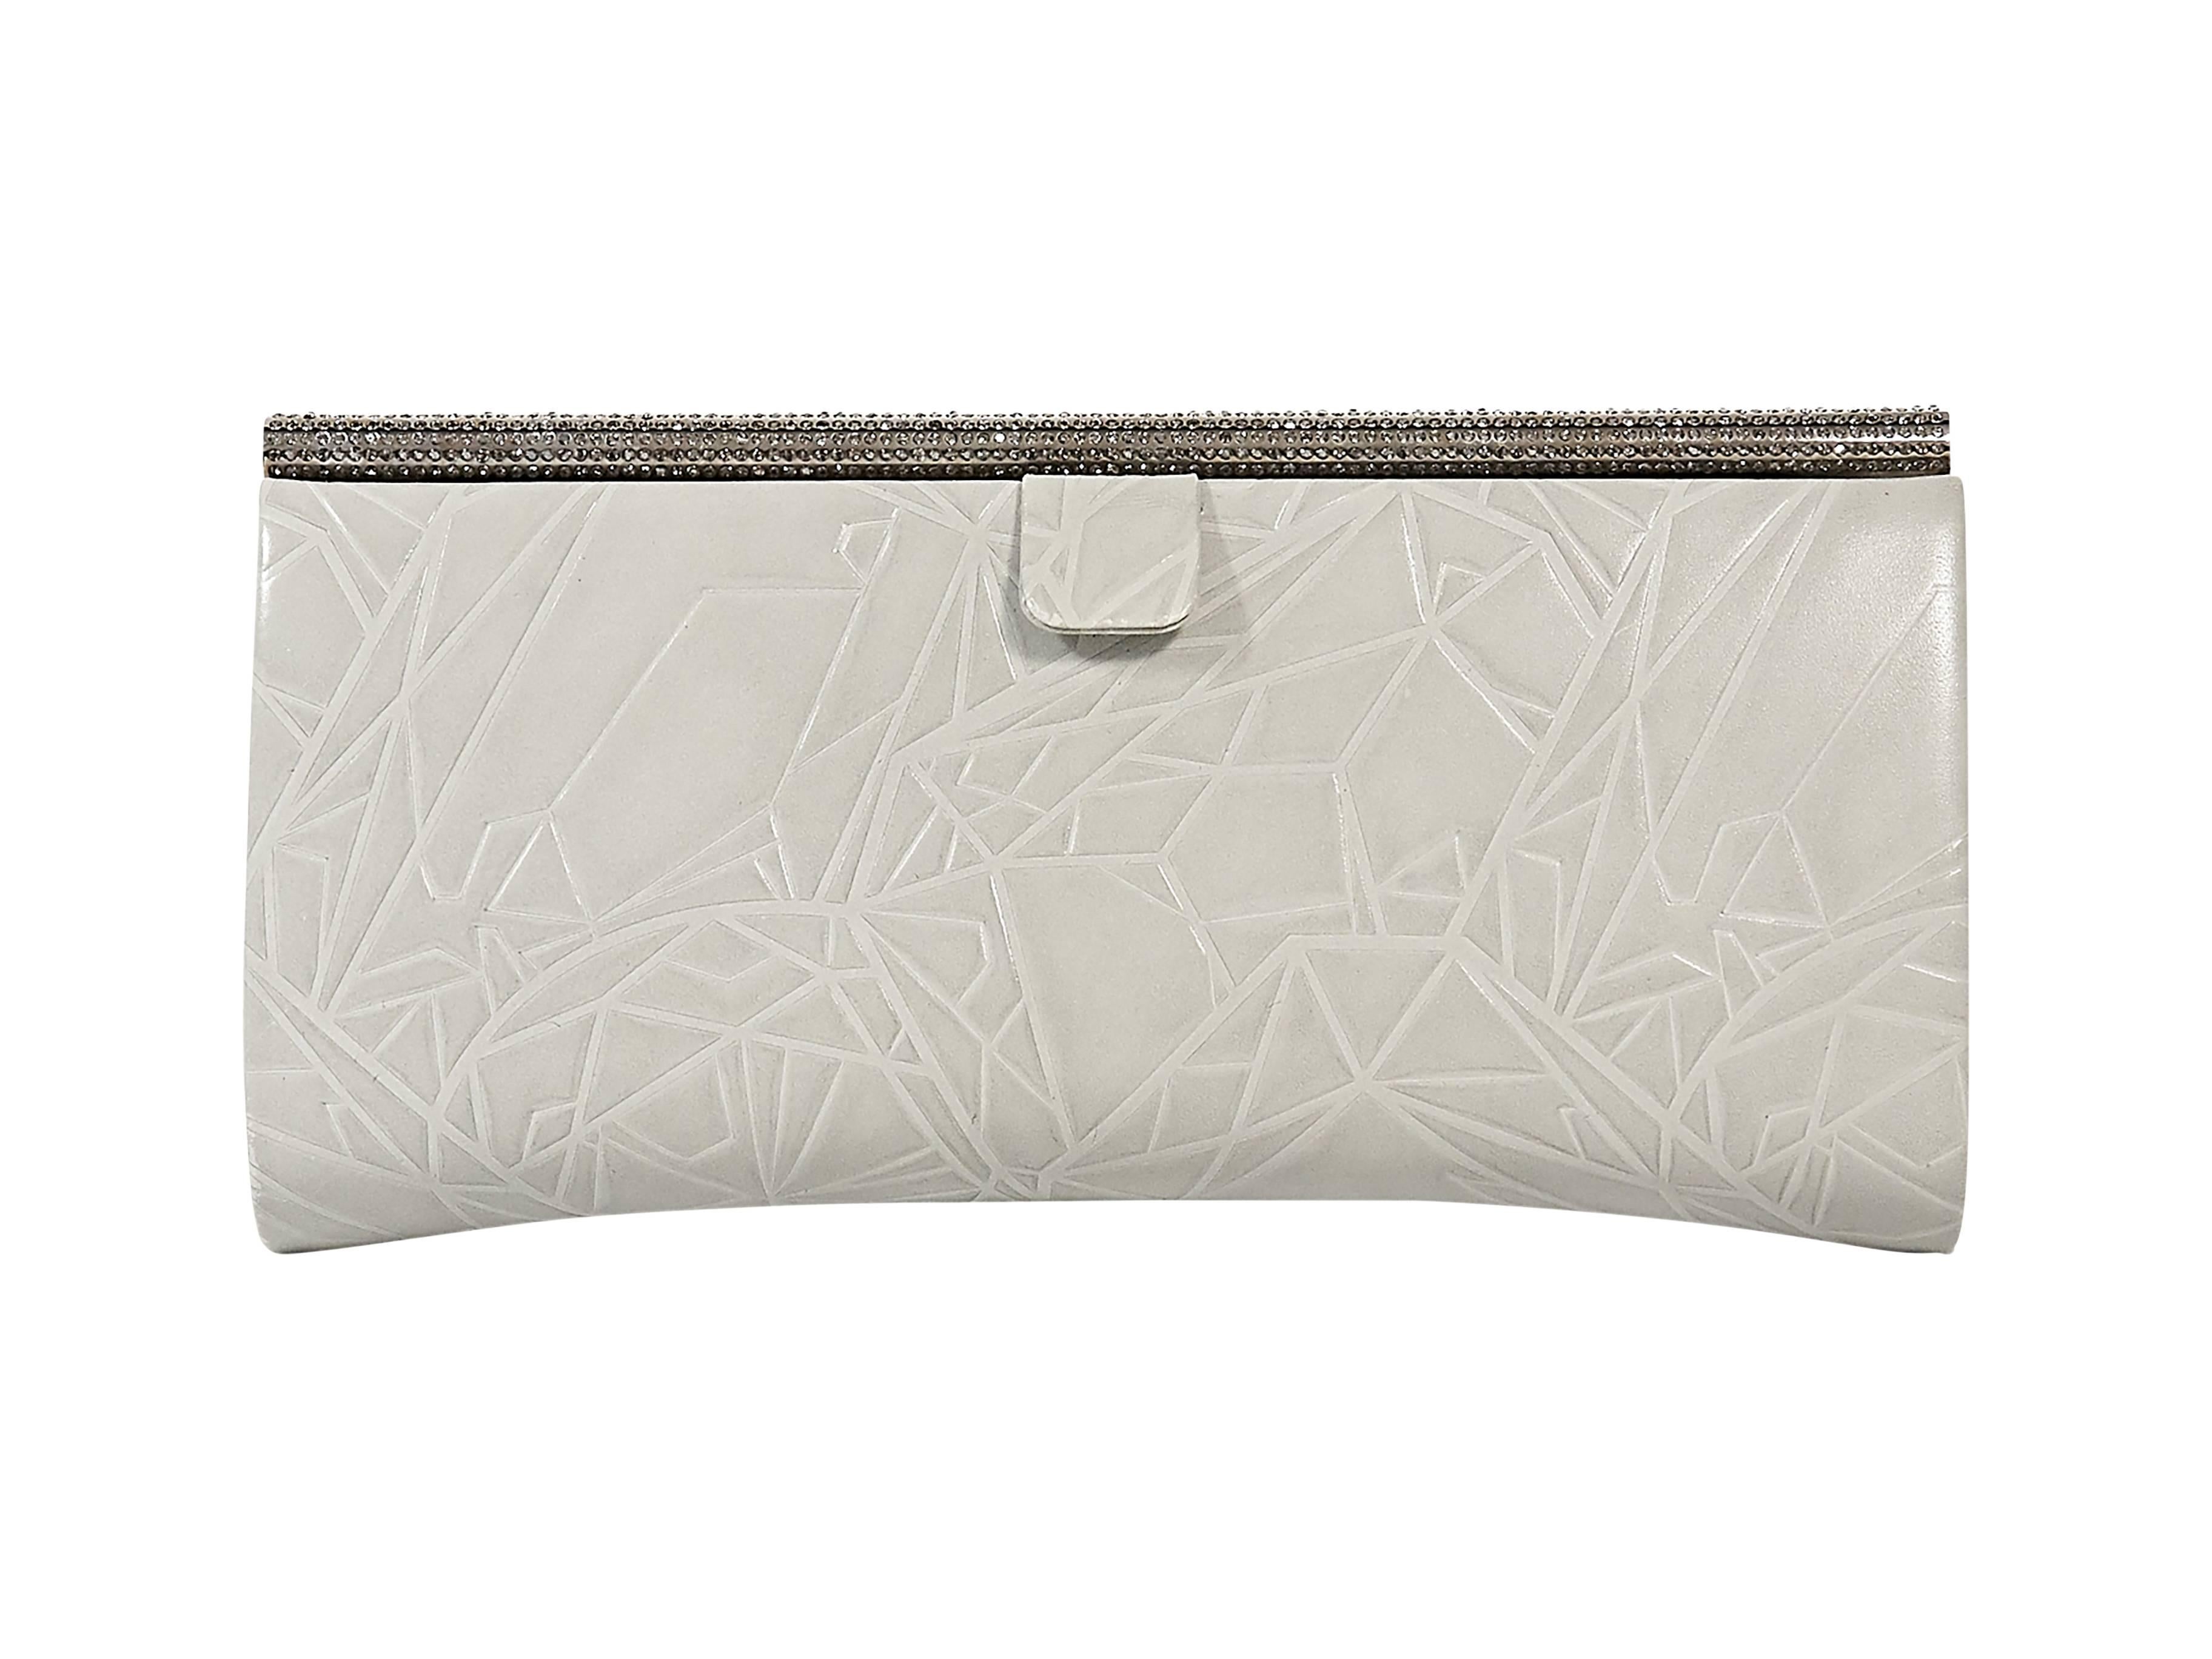 Product details: Grey embossed leather clutch by Swarovski. Crystallized top bar. Lined interior. 8.25"L x 4"H x 1.5"D.
Condition: Excellent. 